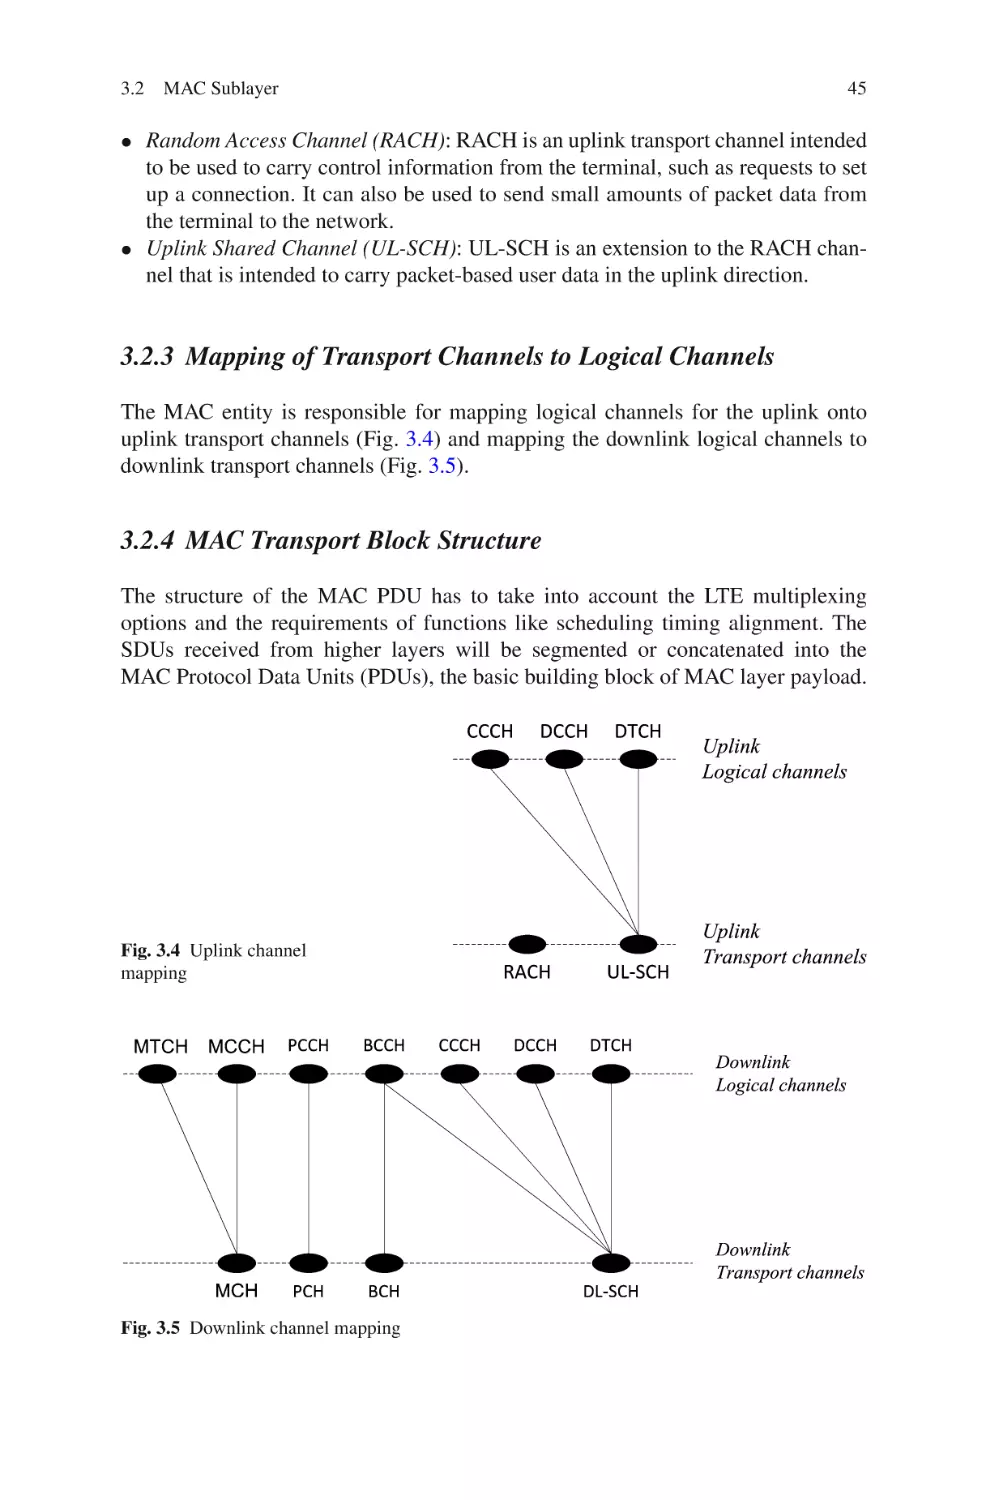 3.2.3  Mapping of Transport Channels to Logical Channels
3.2.4  MAC Transport Block Structure